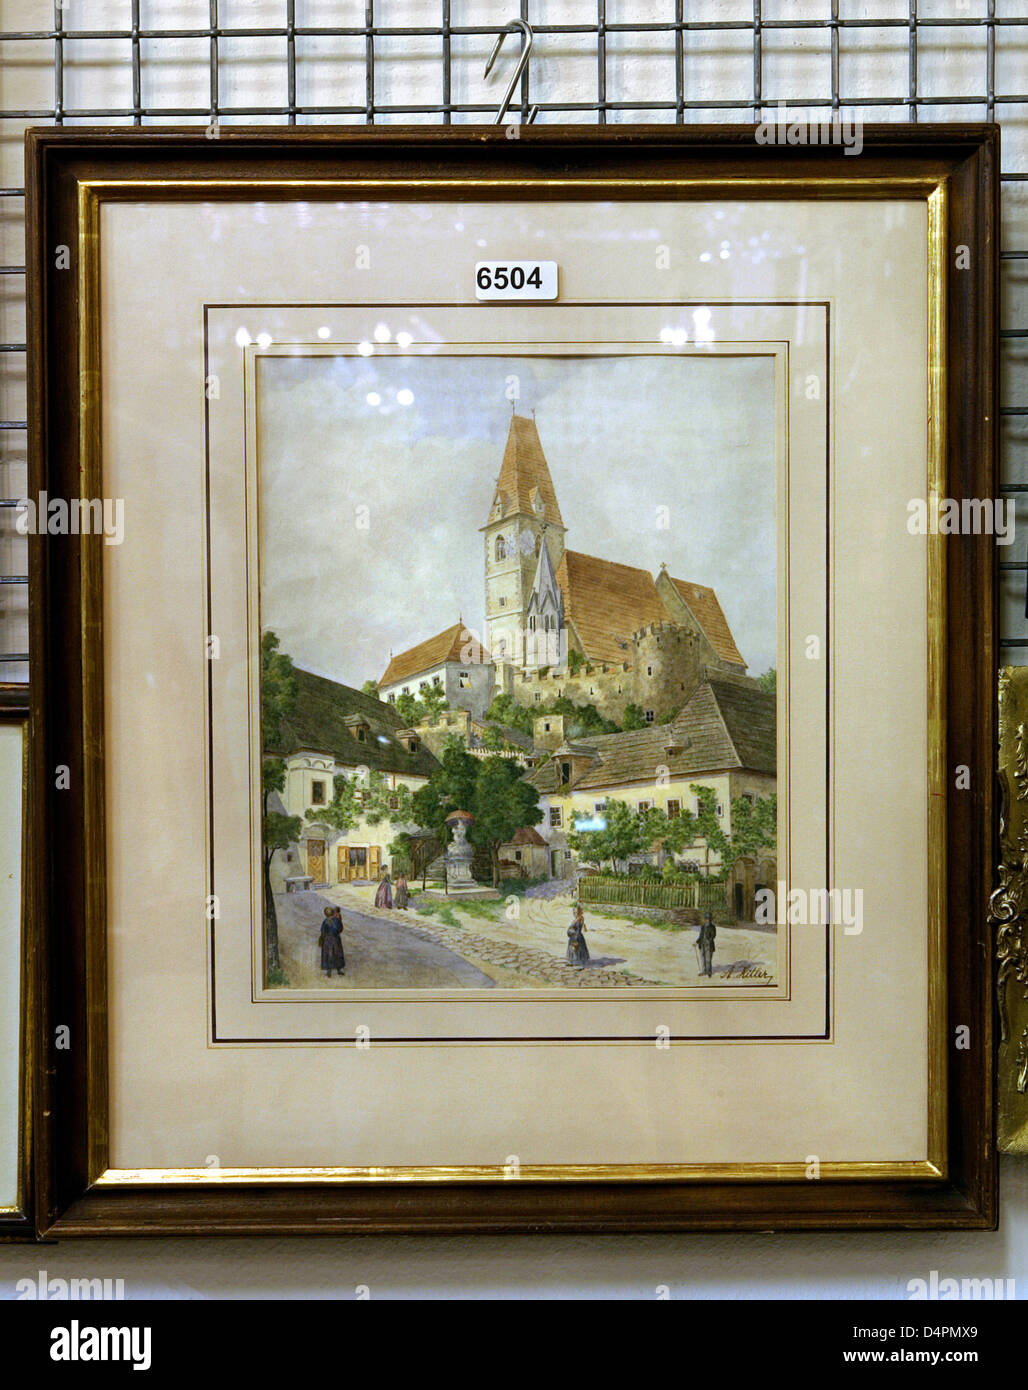 The watercolour ?Weissenkirchen in der Wachau? dated 1911 by Adolf Hitler at an auction house in Nuremberg, Germany, 19 August 2009. Apart from this work, two further watercolours by Hitler, ?Zerschossene Muehle? and ?Haus mit Bruecke am Fluss? dated 1910 will be auctioned at the beginning of September 2009. According to the auction house ?Weissenkirchen in der Wachau? had orginall Stock Photo